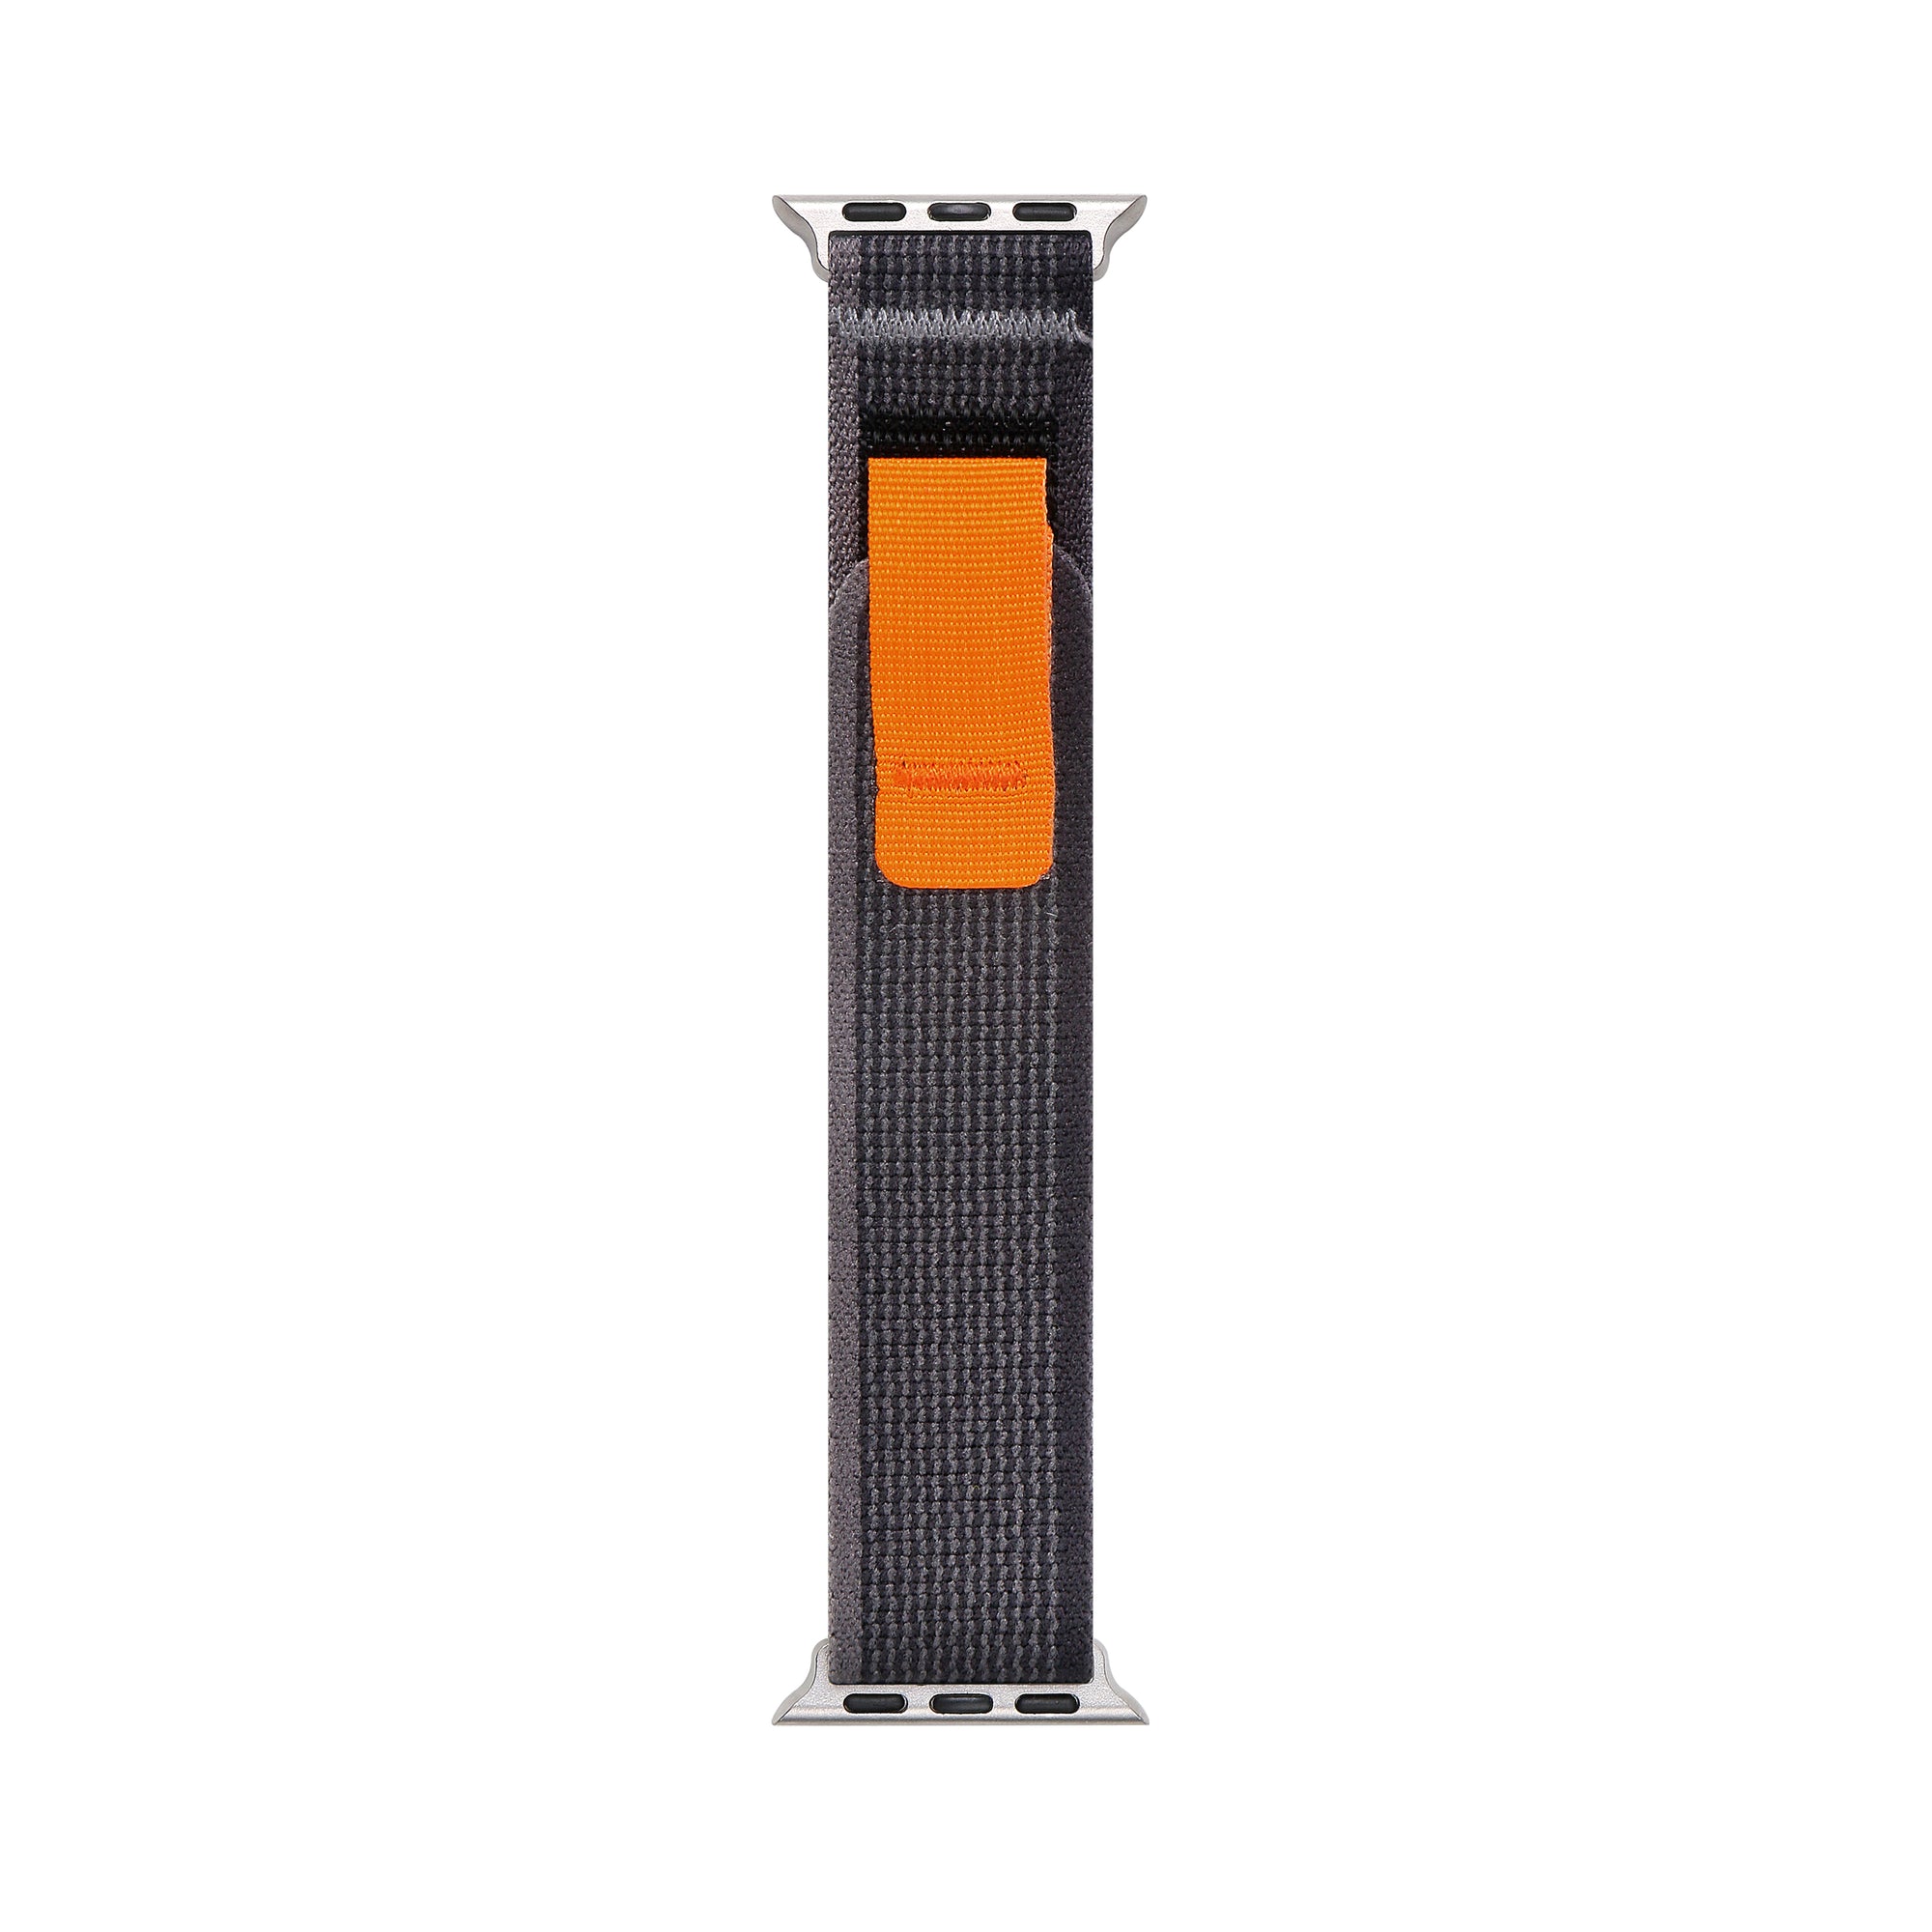 VENTURE NYLON BAND FOR APPLE WATCH